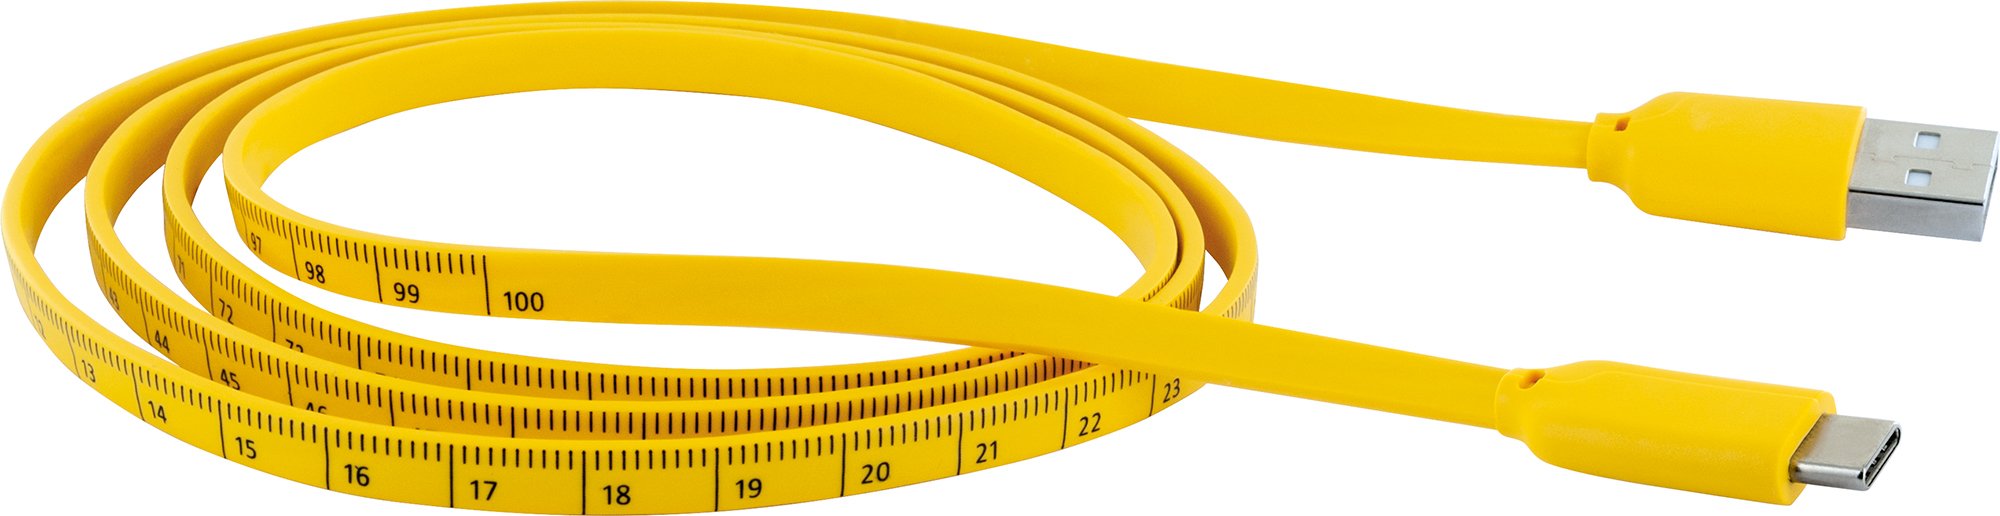 Type C sync & charging cable with measuring tape